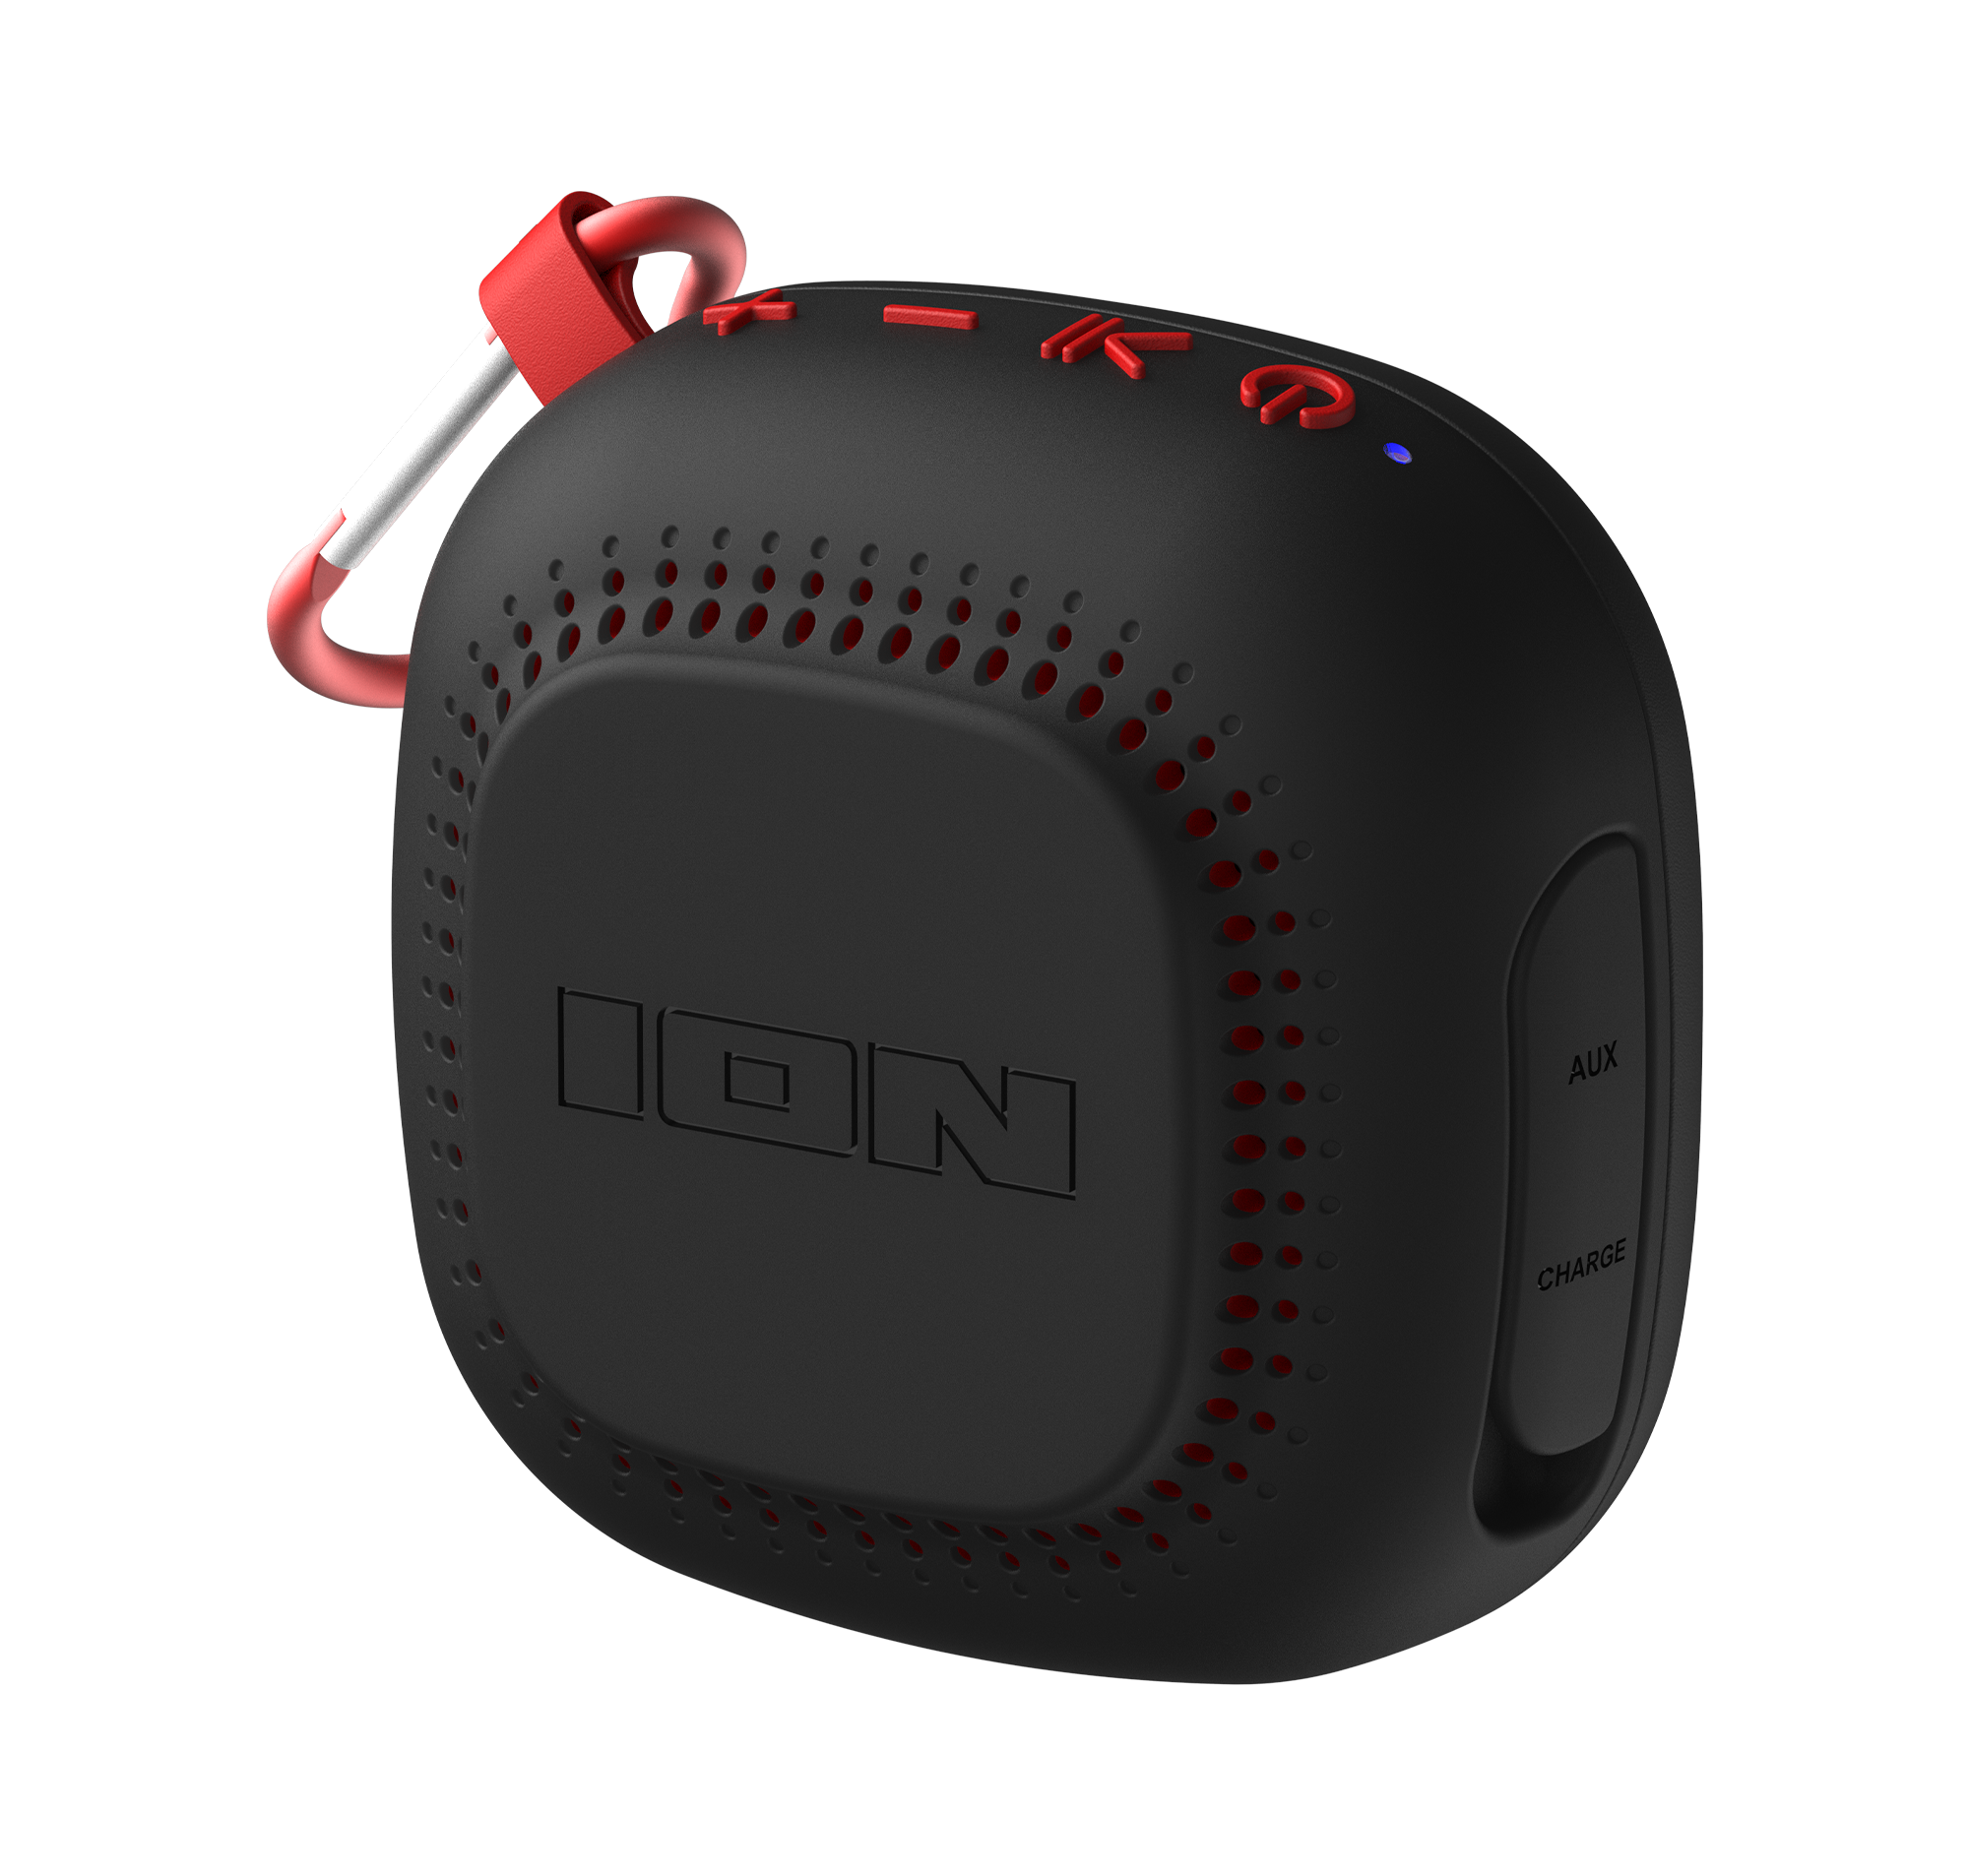 ION Audio Magnet Rocker Portable Bluetooth Speaker 2 Pack with Water Resistant, Black, iSP153 - image 4 of 12